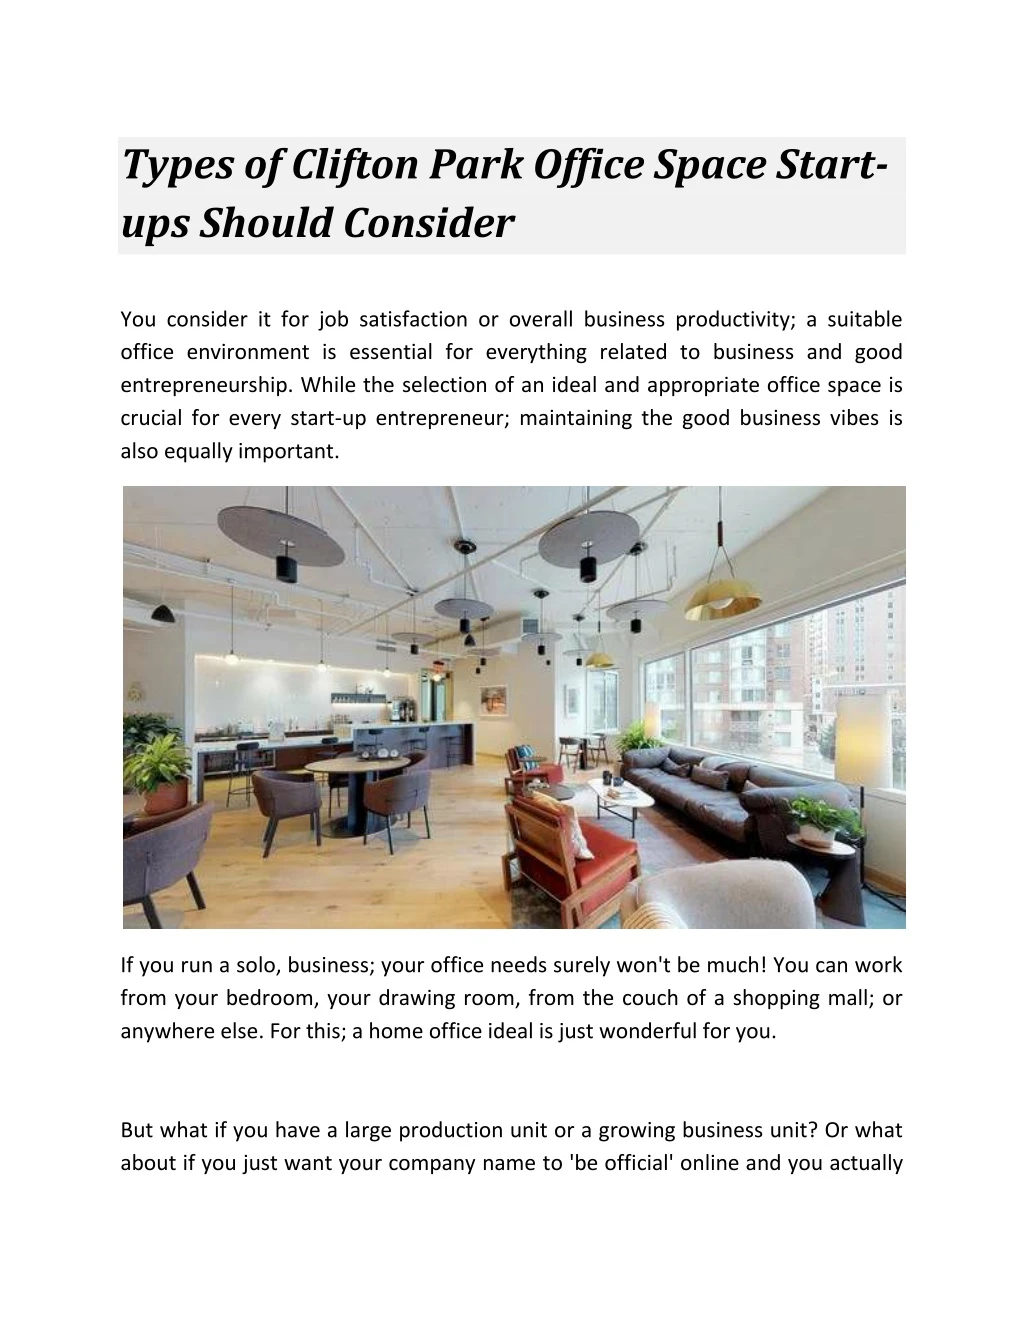 types of clifton park office space start